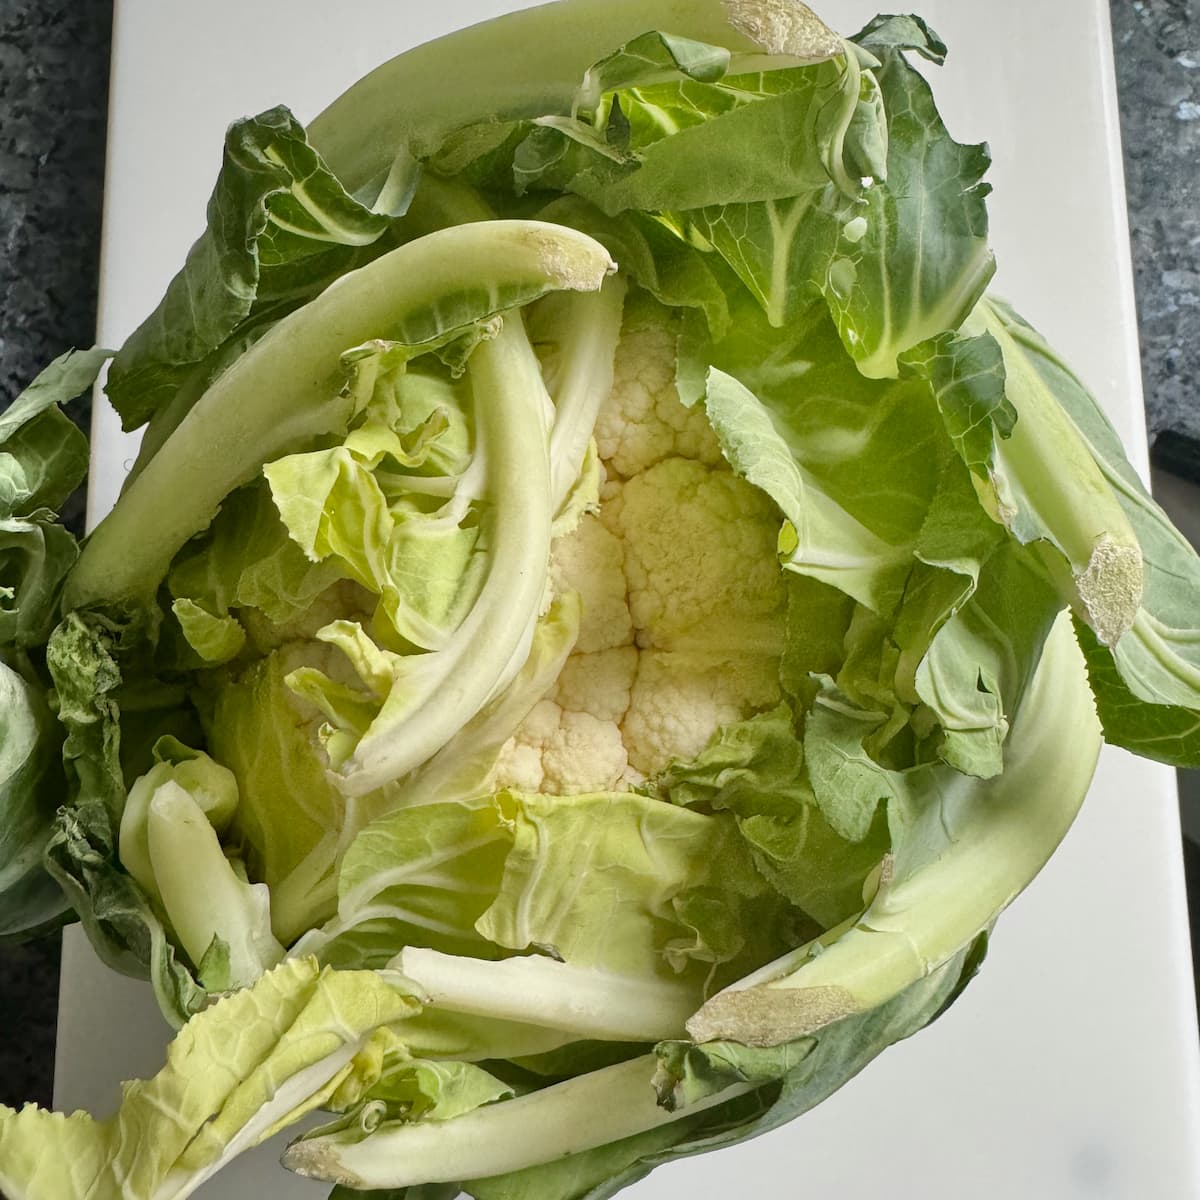 whole head of cauliflower covered in large outer leaves